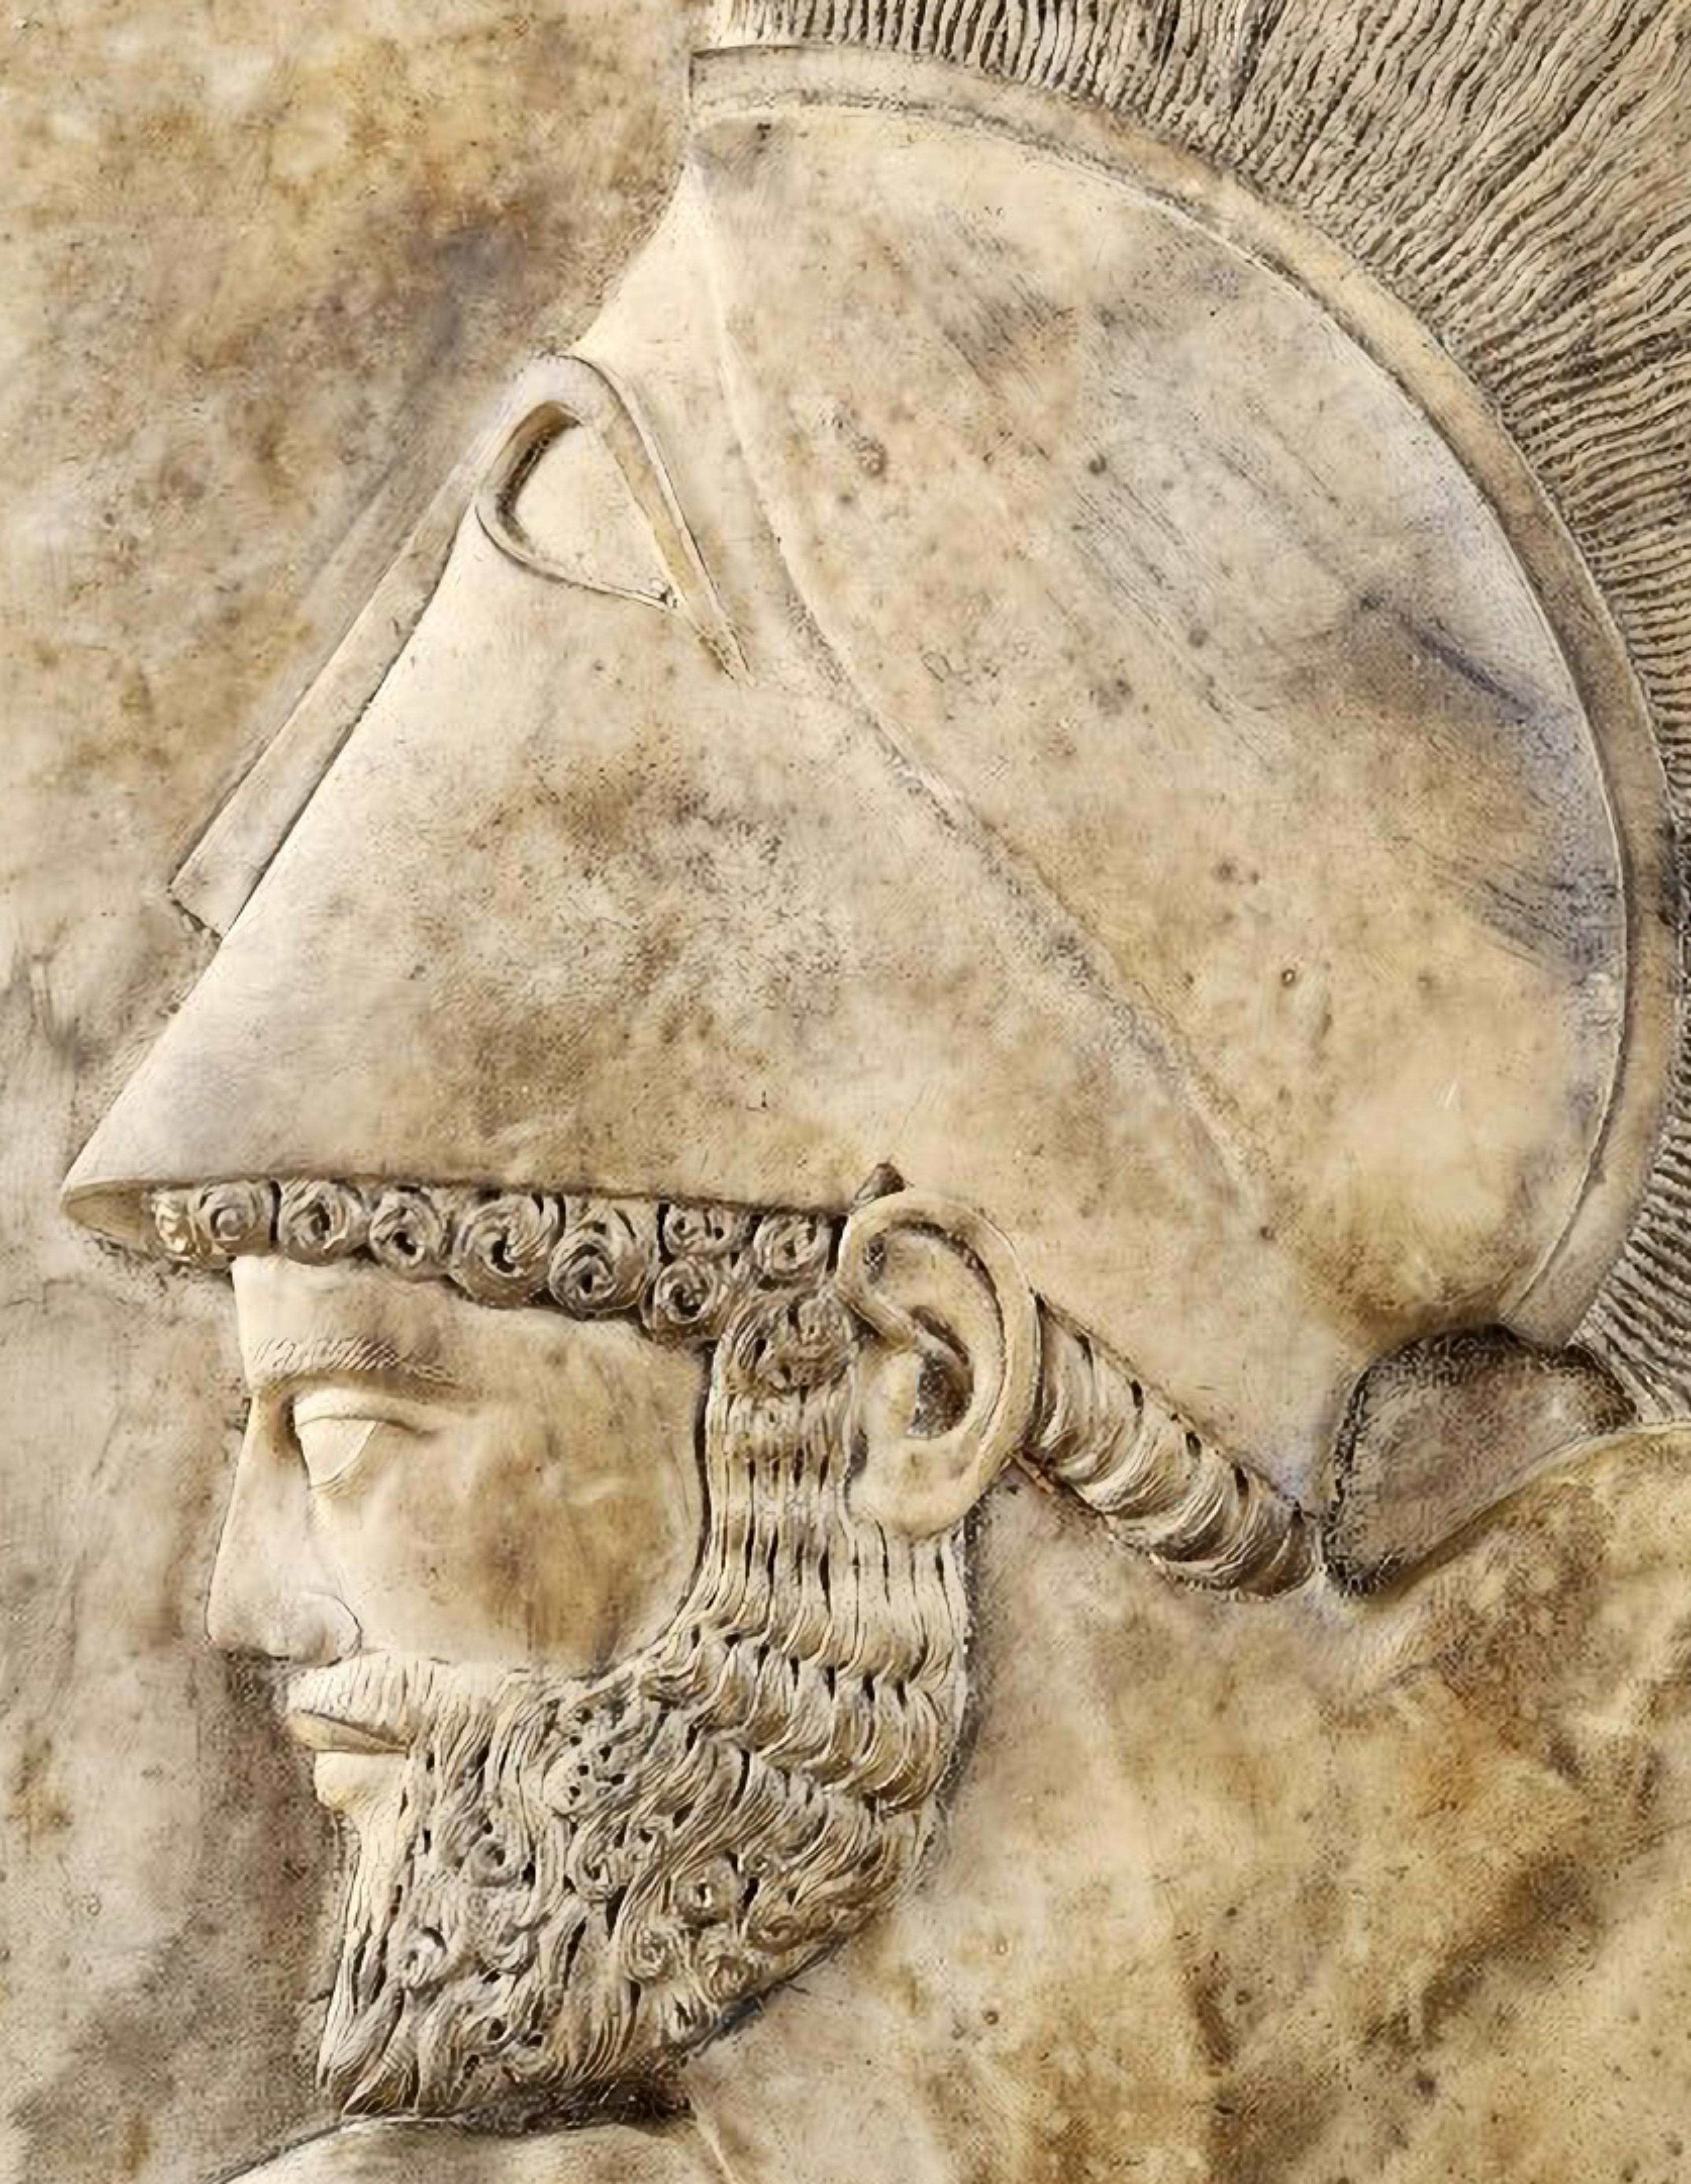 ACHILLES - BAS-RELIEF IN CARRARA MARBLE
early 20th Century
Italy

HEIGHT 50 cm
WIDTH 40 cm
WEIGHT 19 kg
MATERIAL White Carrara marble
MAXIMUM THICKNESS 5 cm

good conditions